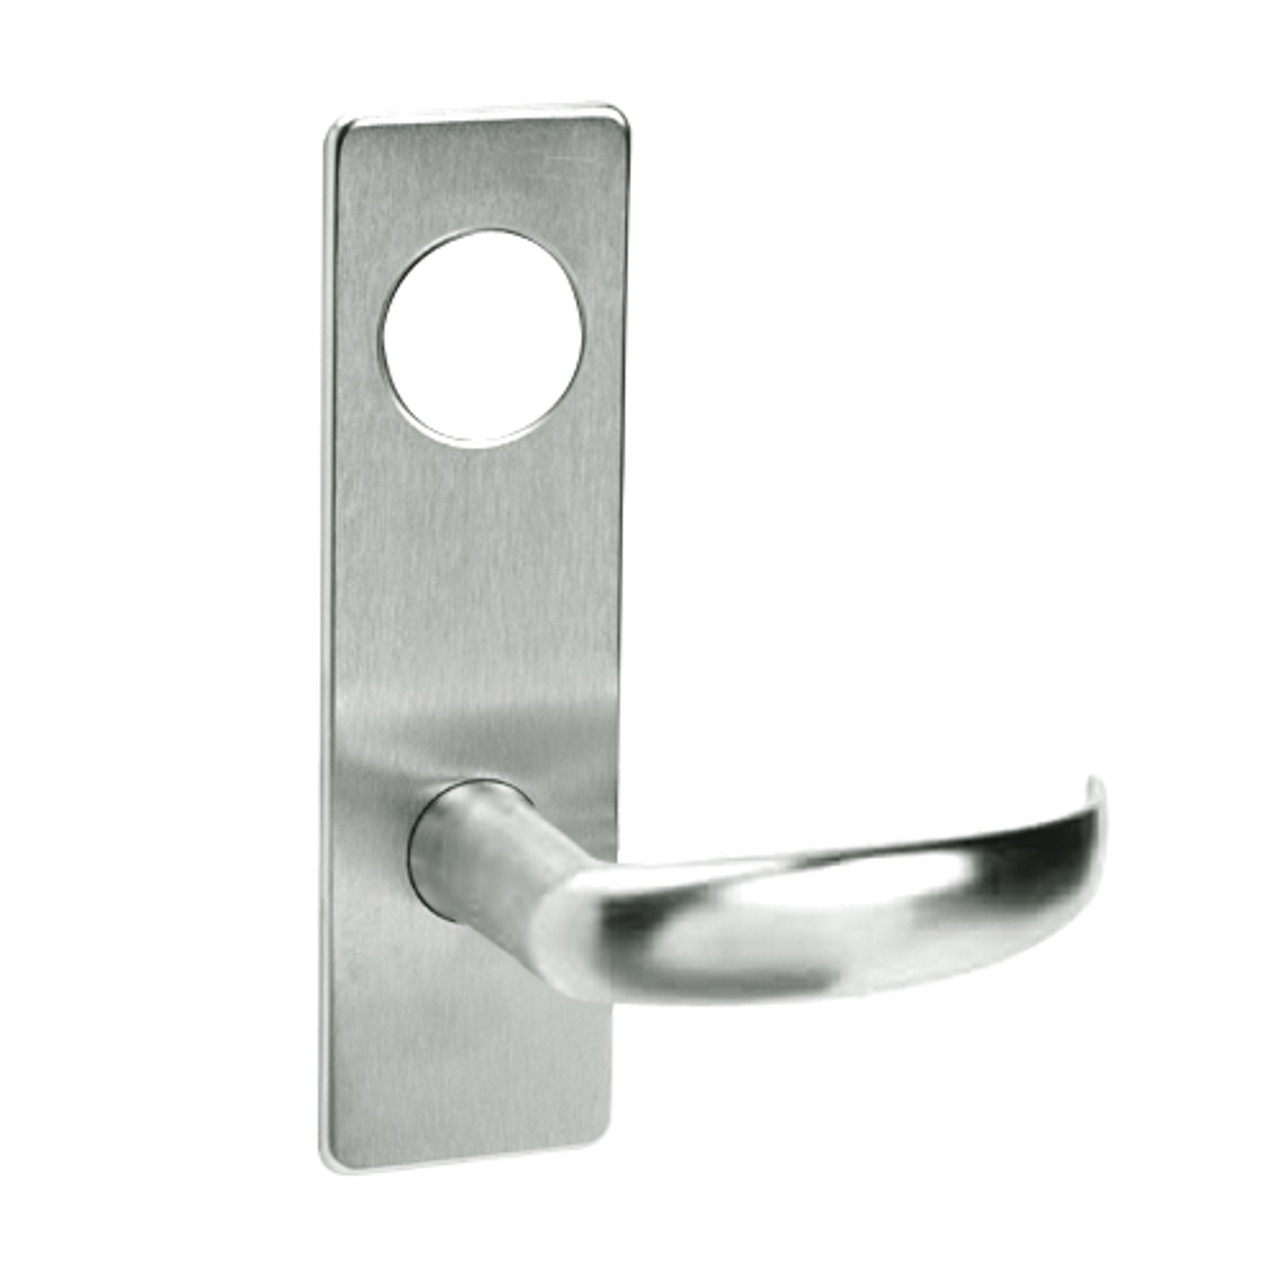 ML2029-PSR-618 Corbin Russwin ML2000 Series Mortise Hotel Locksets with Princeton Lever and Deadbolt in Bright Nickel